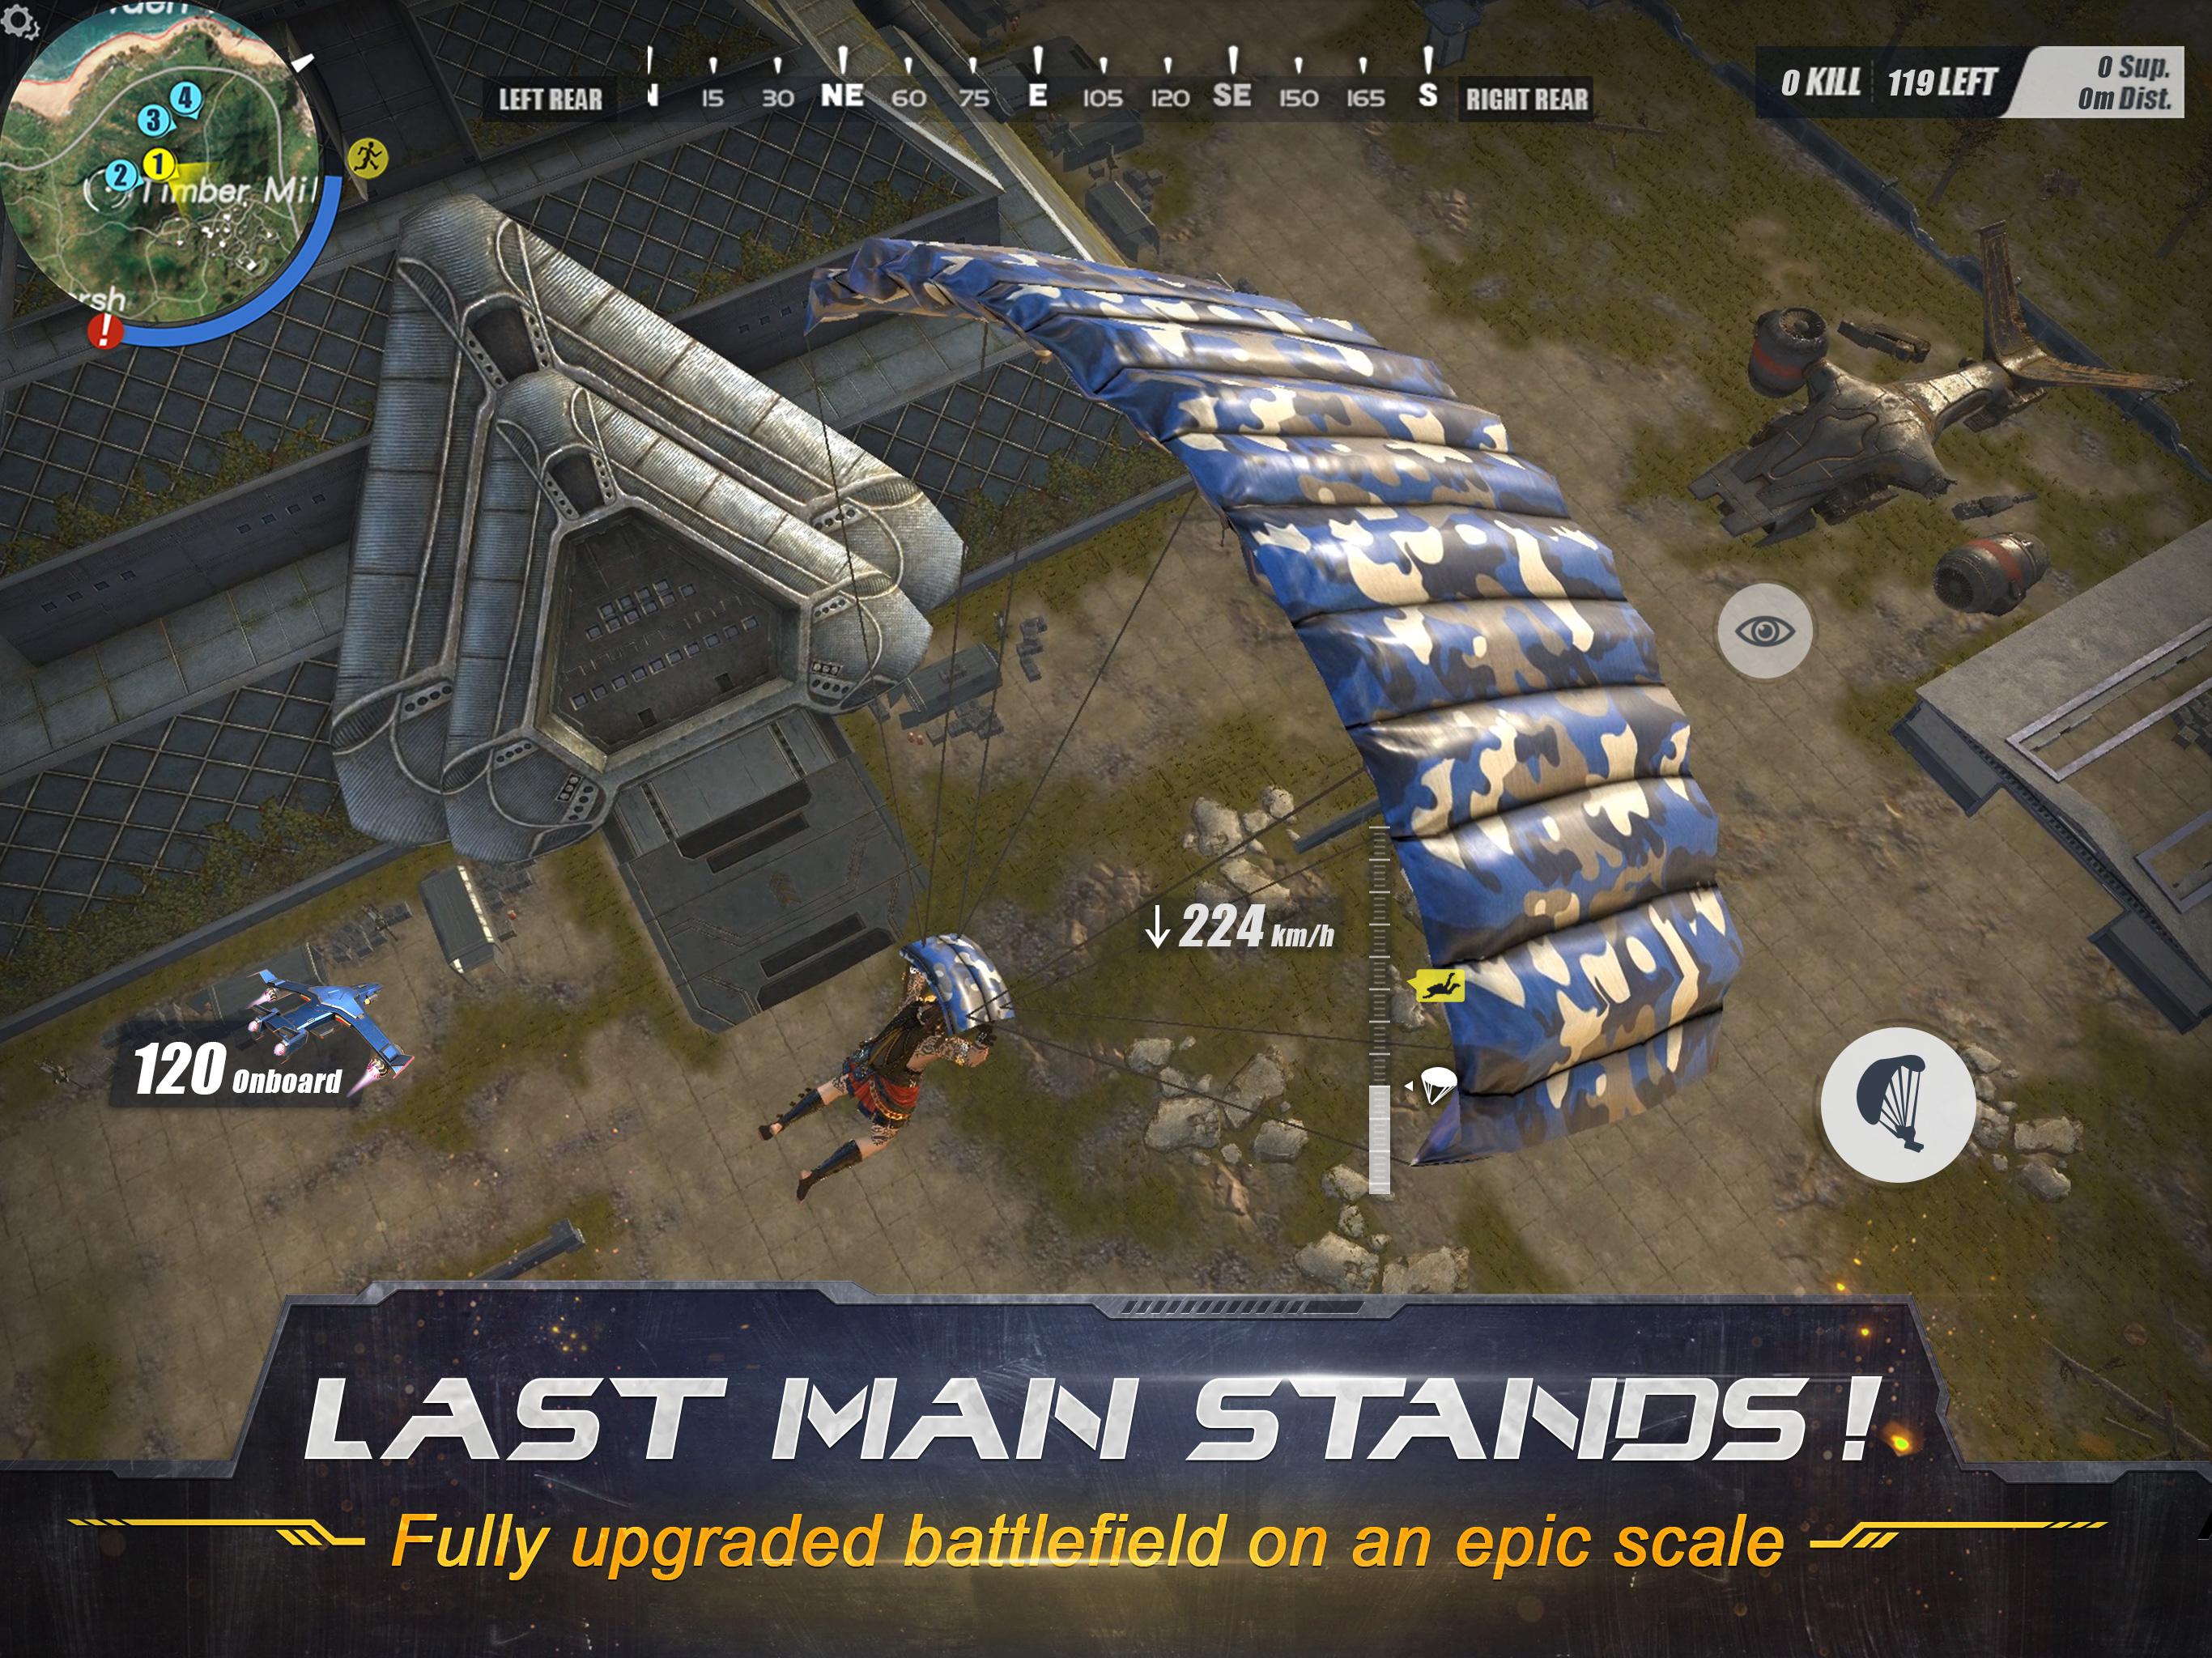 How to Download Rules of Survival on PC (with Pictures) - wikiHow